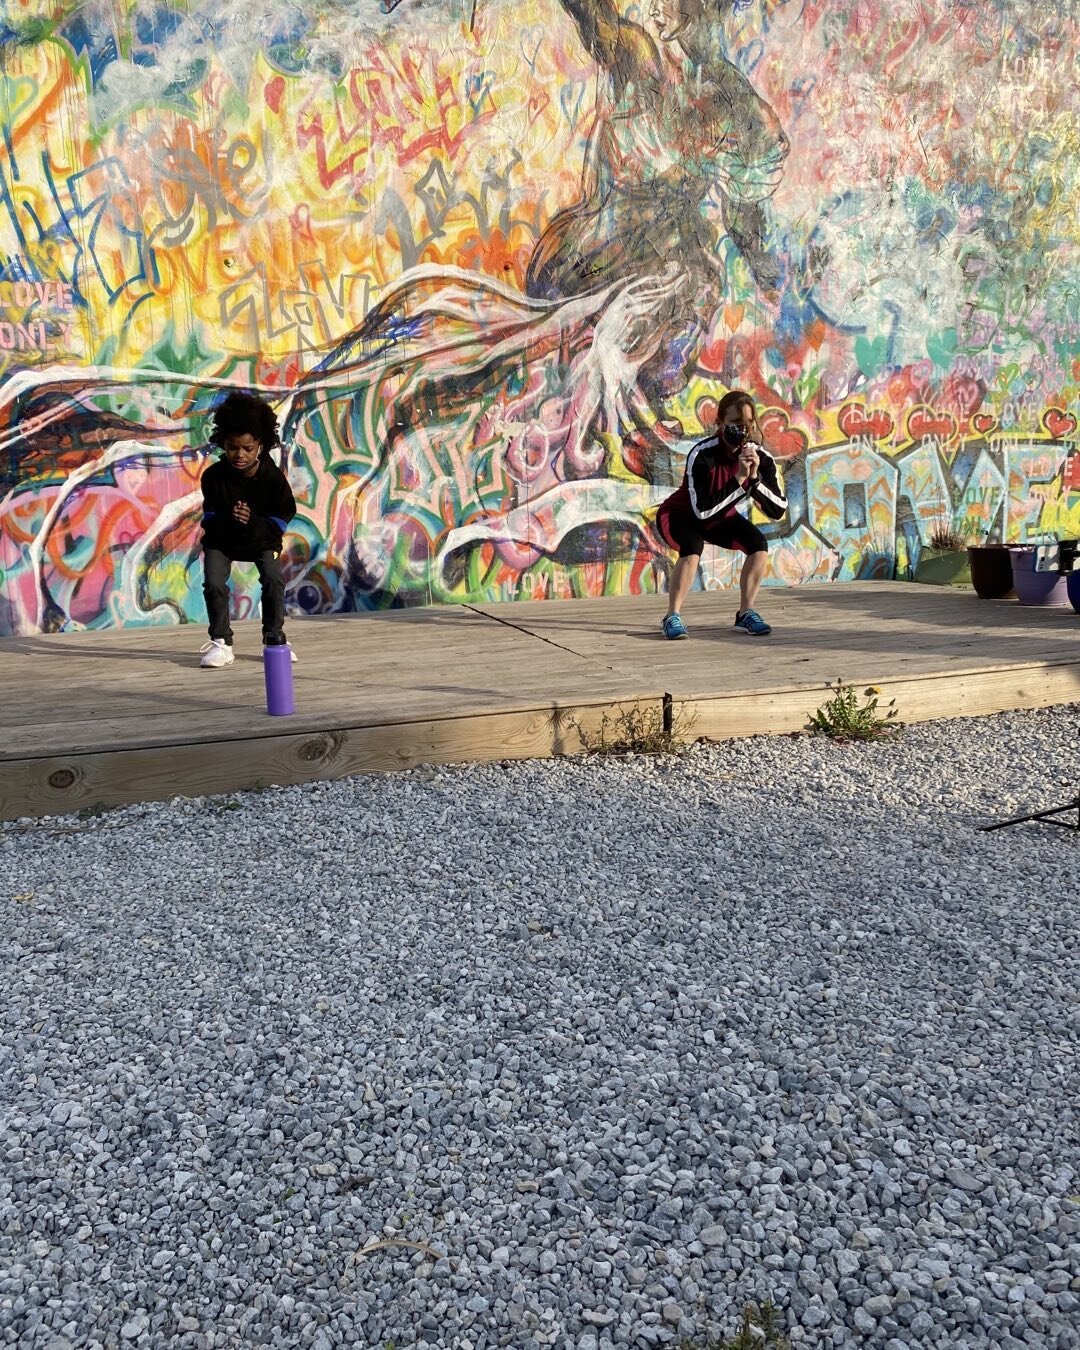 Cardio Boot Camp with @love_and_spinach at 6:30pm $Free99 ⭐️ you can sign up at on the website for a link or meet us at the space. It&rsquo;s a space for women by women. Ever grateful for @gfett and @kristenmichaels and the team!